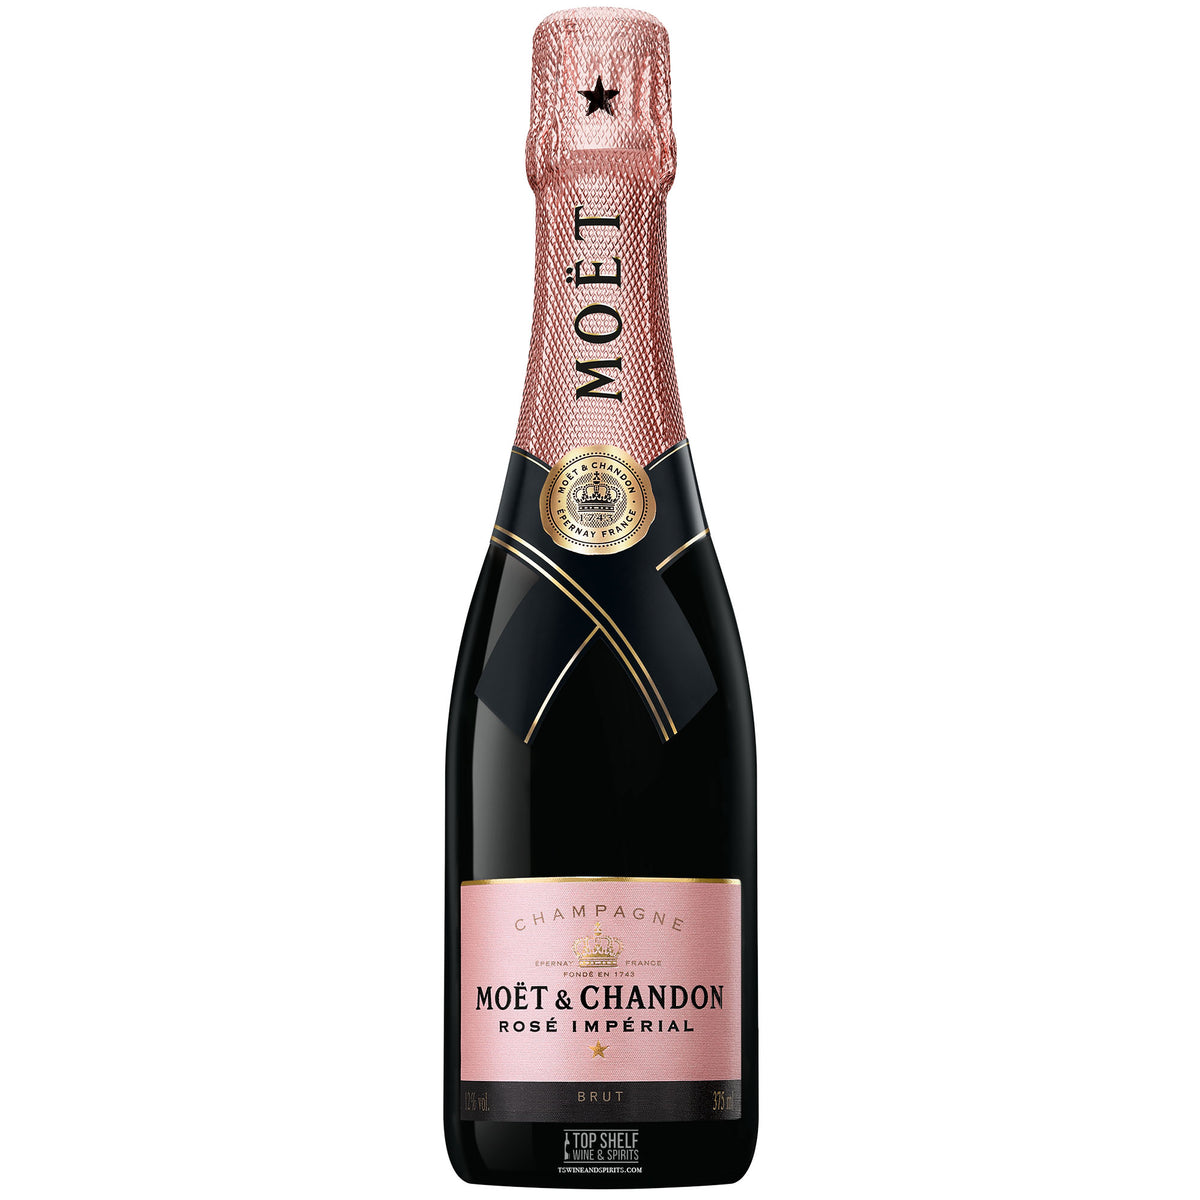 Moët & Chandon Impérial Rosé Champagne with Gift Box Tin